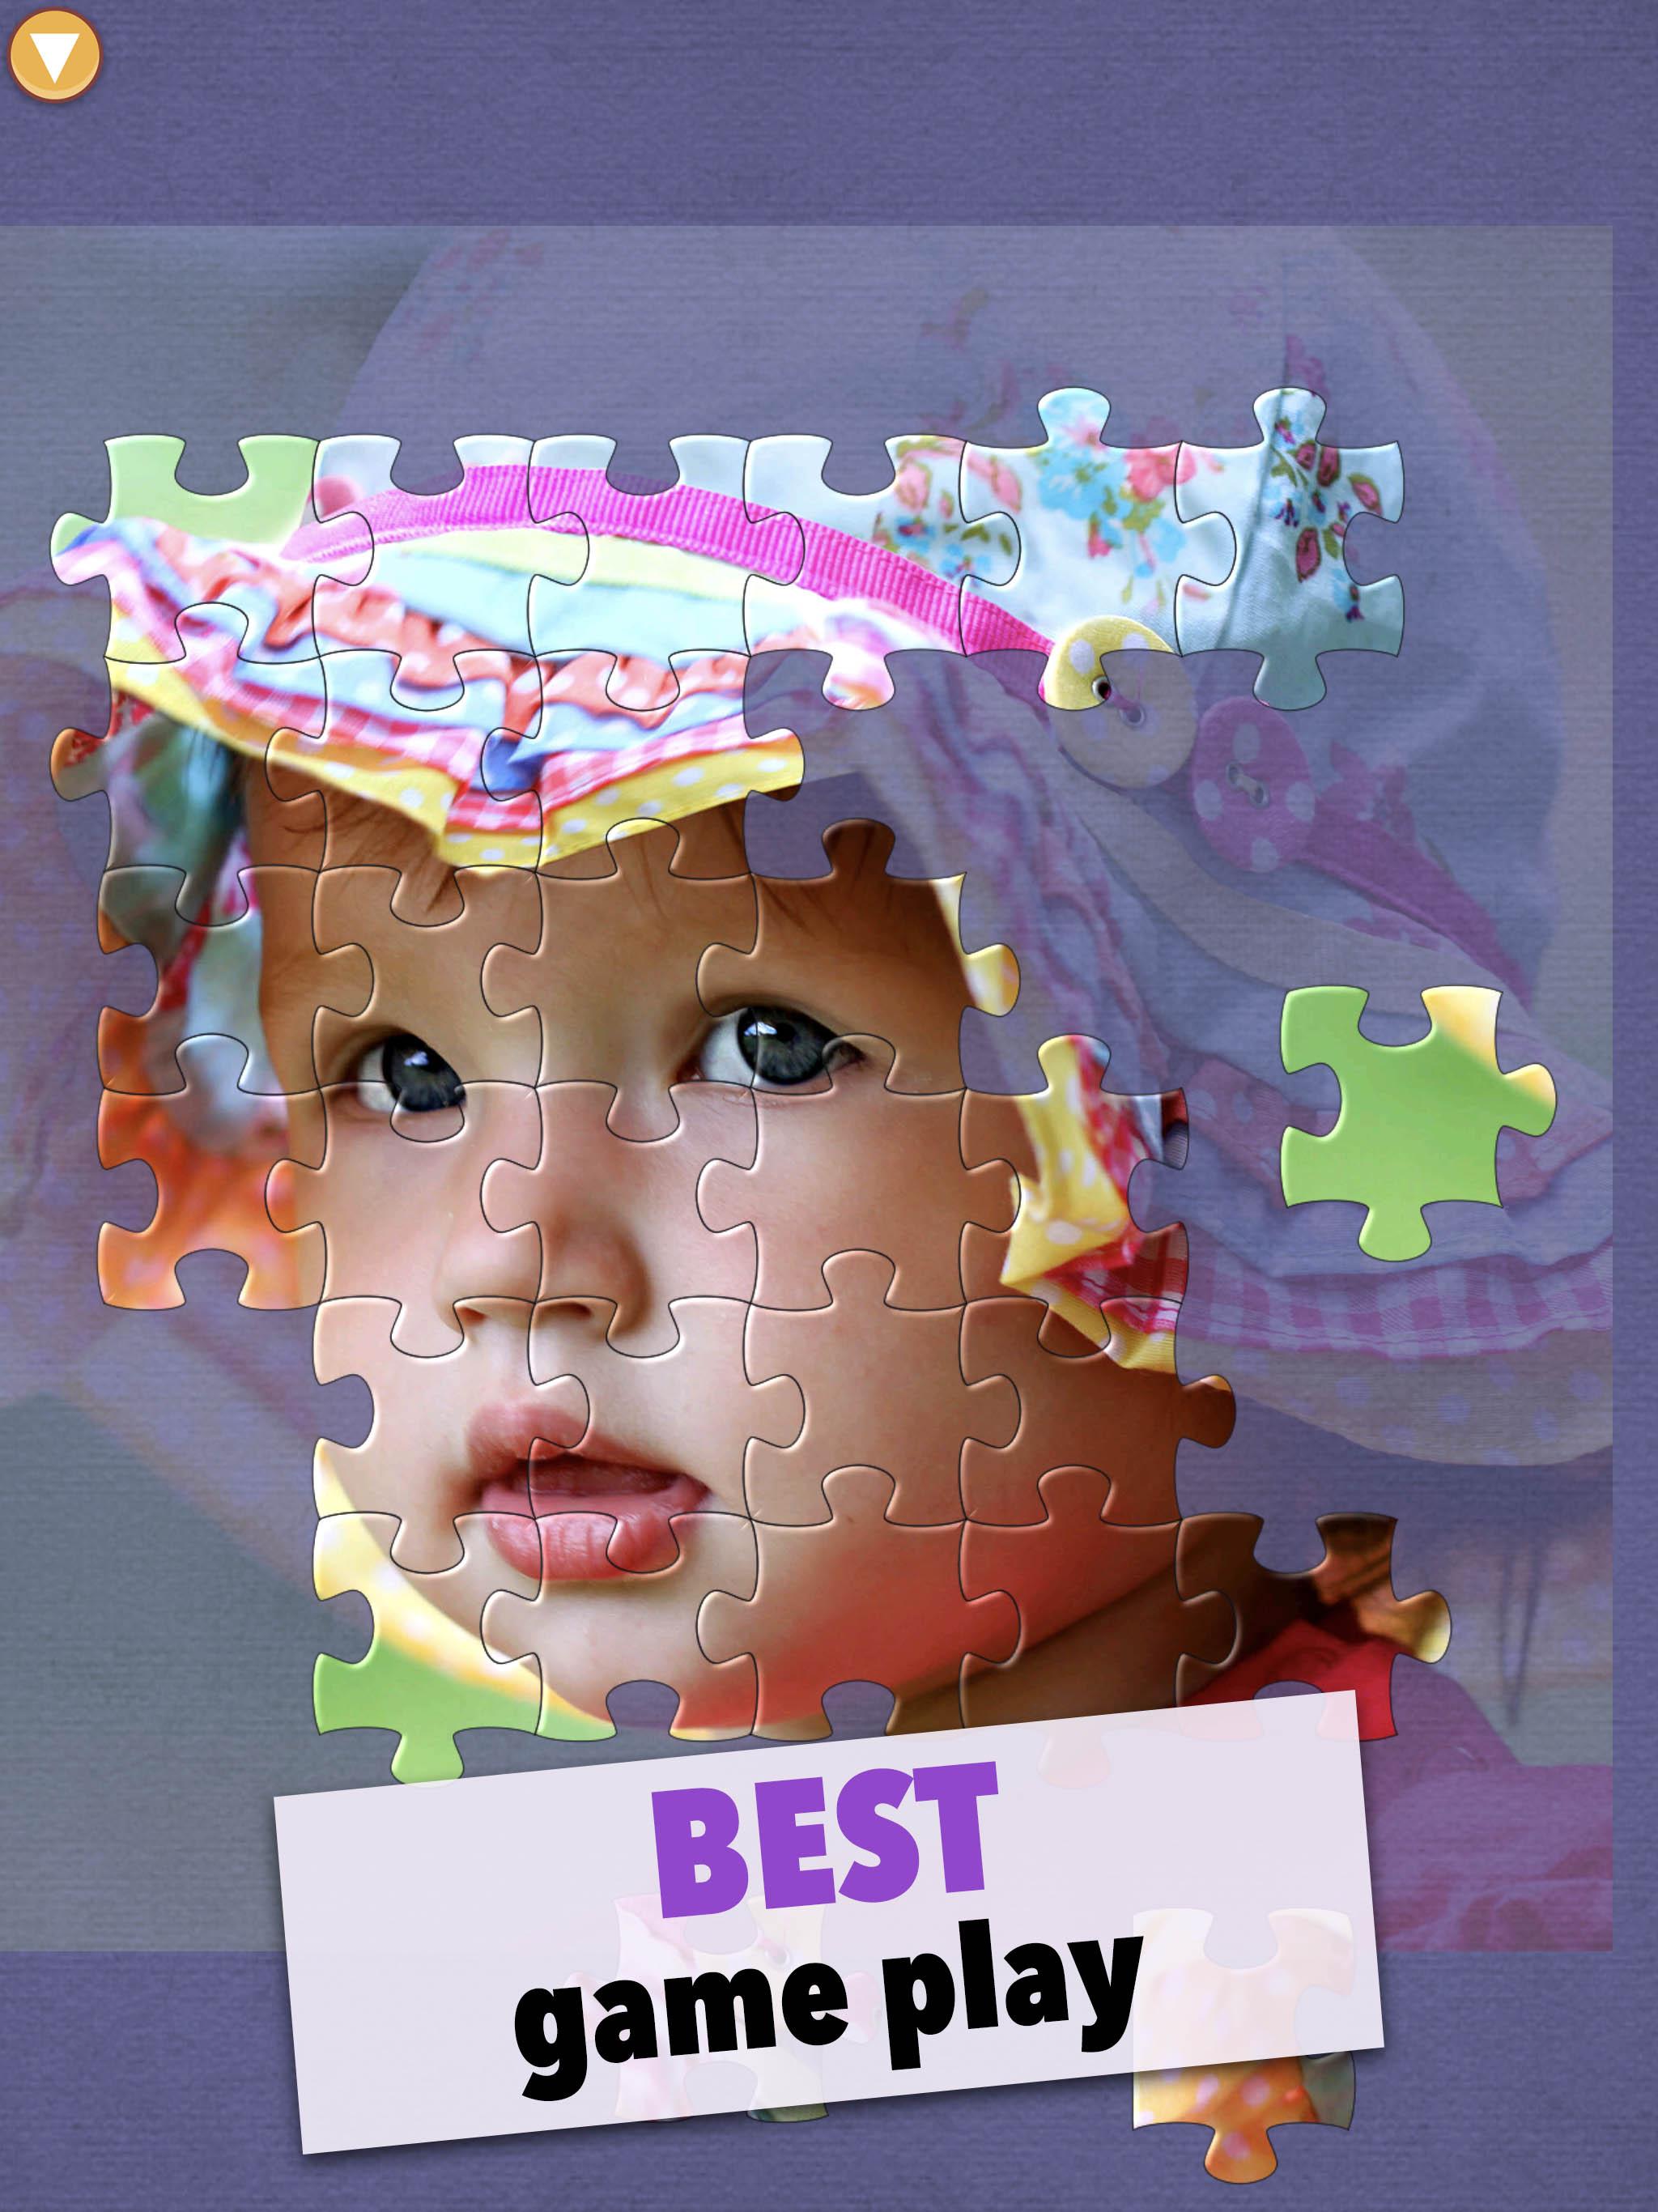 World of Puzzles - best free jigsaw puzzle games 1.16 Screenshot 8